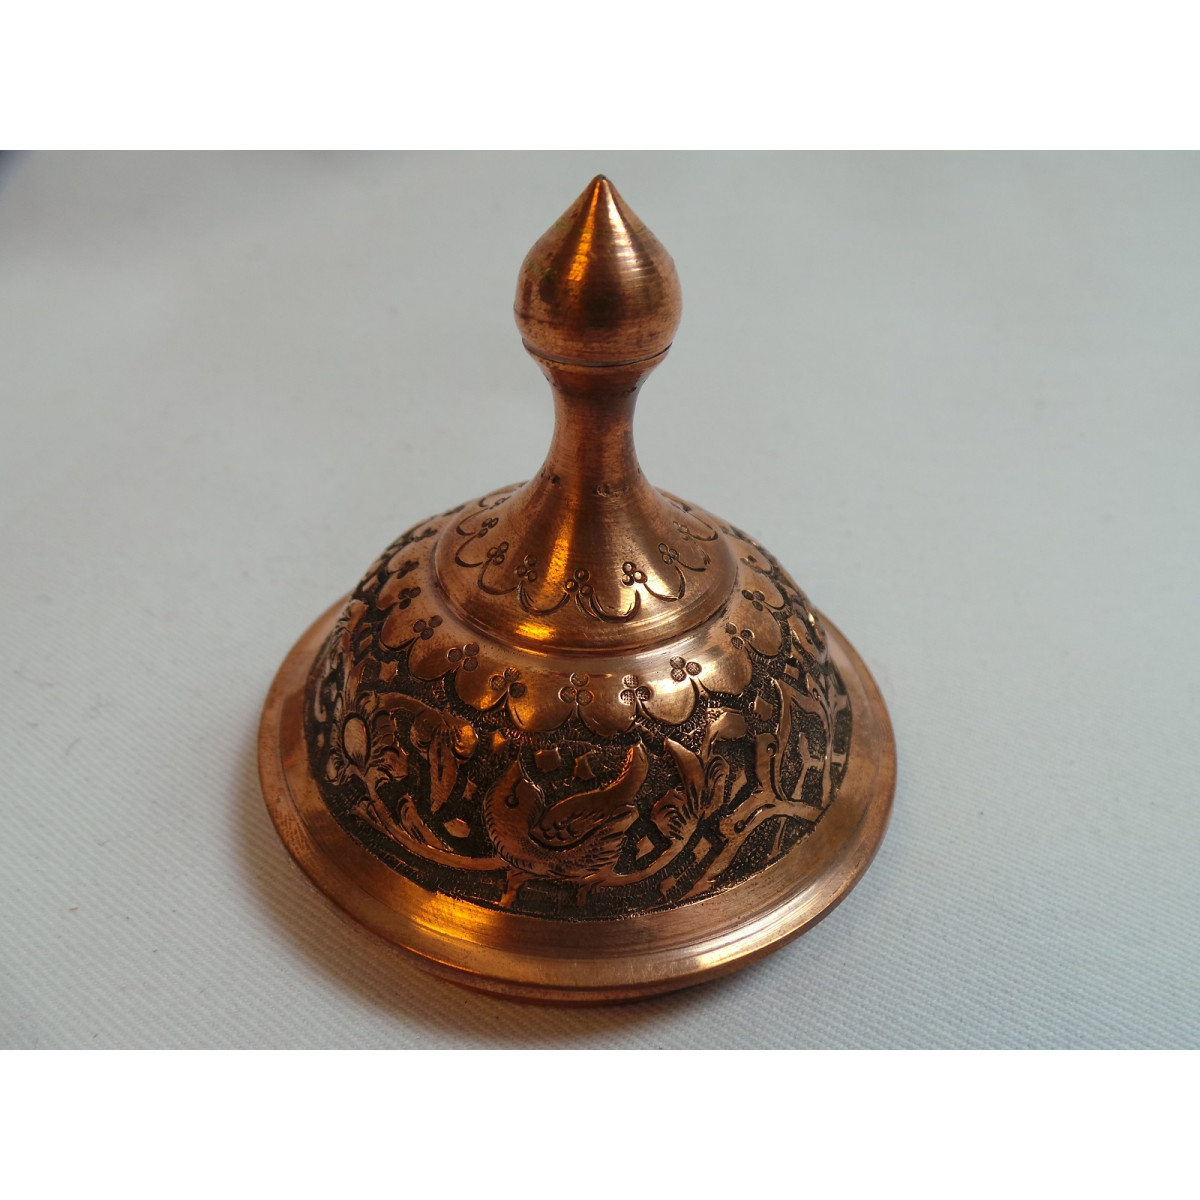 https://persianhandicrafts.com/image/cache/catalog/Products/Handicrafts/Engraving/HG1036/New/Engraved%20Sugar%20Pot%20Candy%20Dish%20HG1036_8-1200x1200w.JPG